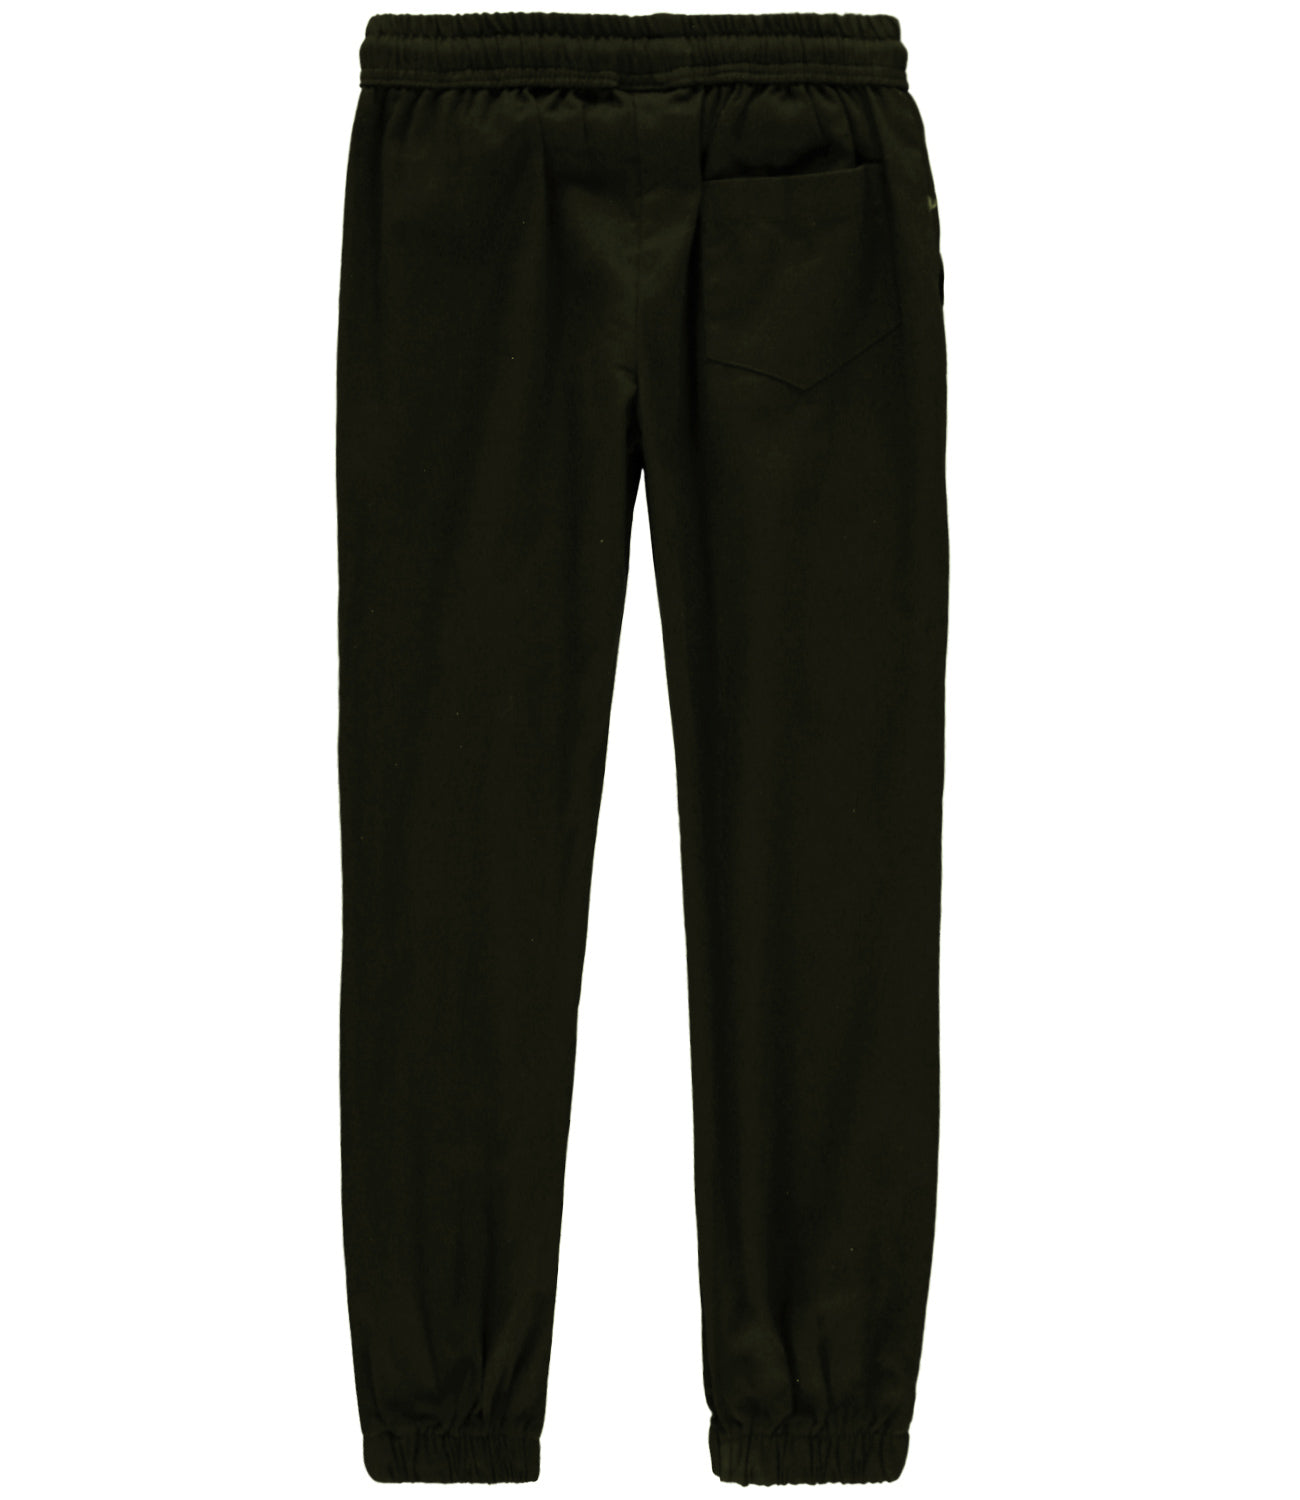 LR Scoop Boys 4-7 Twill Jogger with Elastic-Waistband and Drawstring